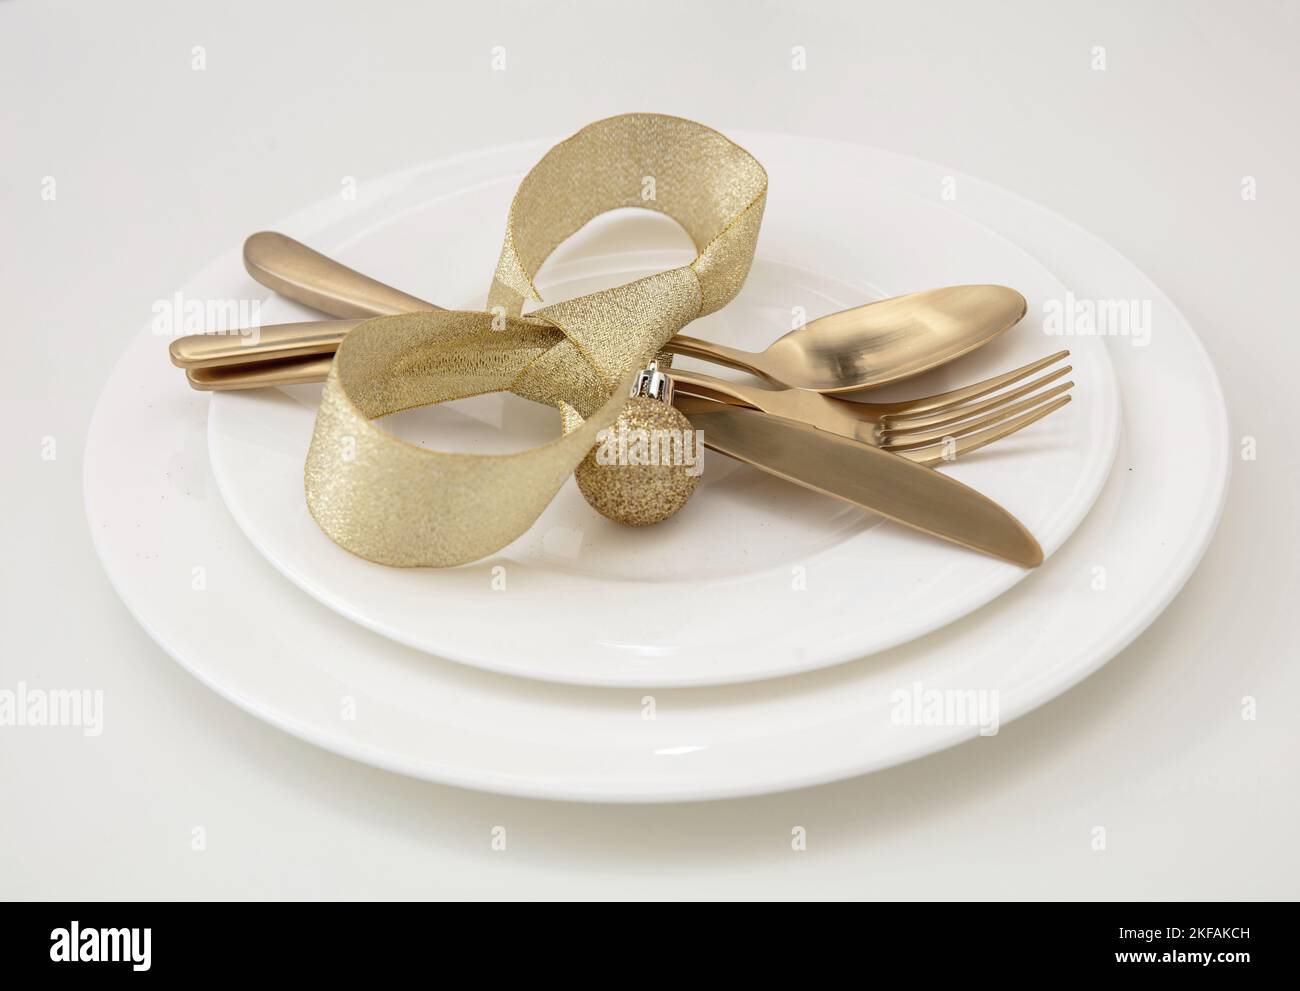 Christmas table setting close up view. Golden cutlery and dishes isolated on white, Elegant restaurant, celebration dinner Stock Photo